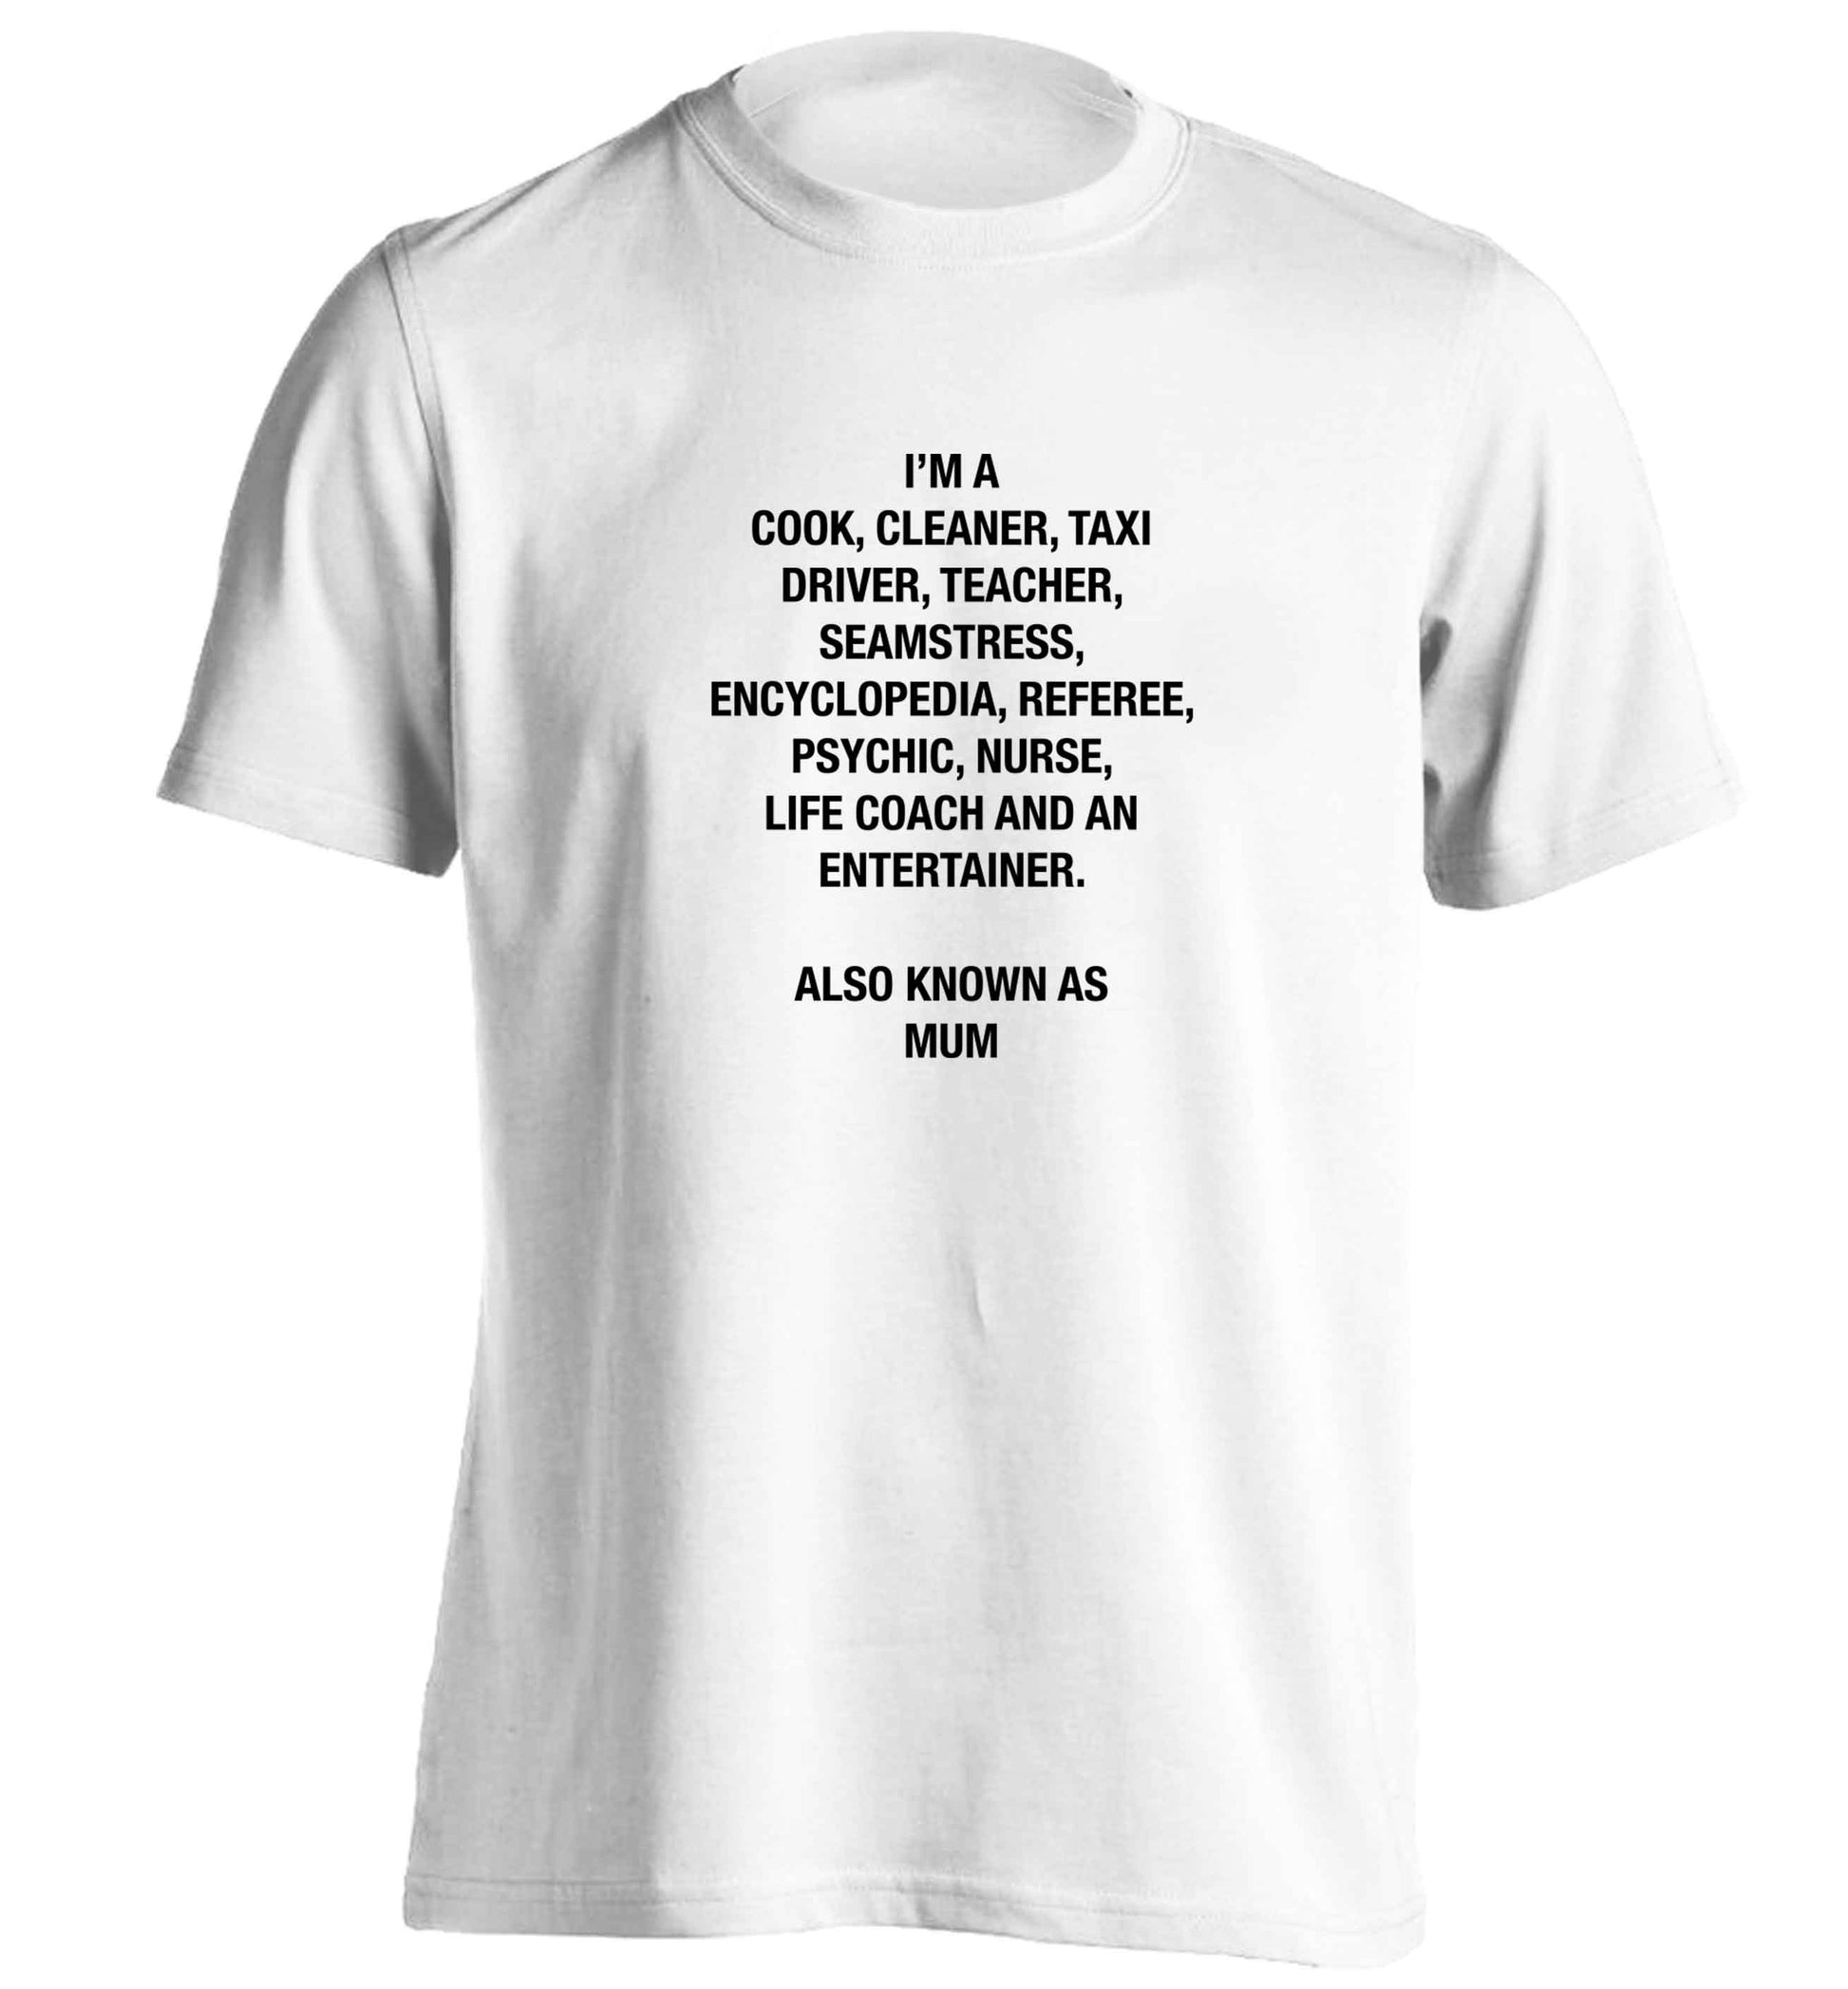 Funny gifts for your mum on mother's dayor her birthday! Mum, cook, cleaner, taxi driver, teacher, seamstress, encyclopedia, referee, psychic, nurse, life coach and entertainer adults unisex white Tshirt 2XL